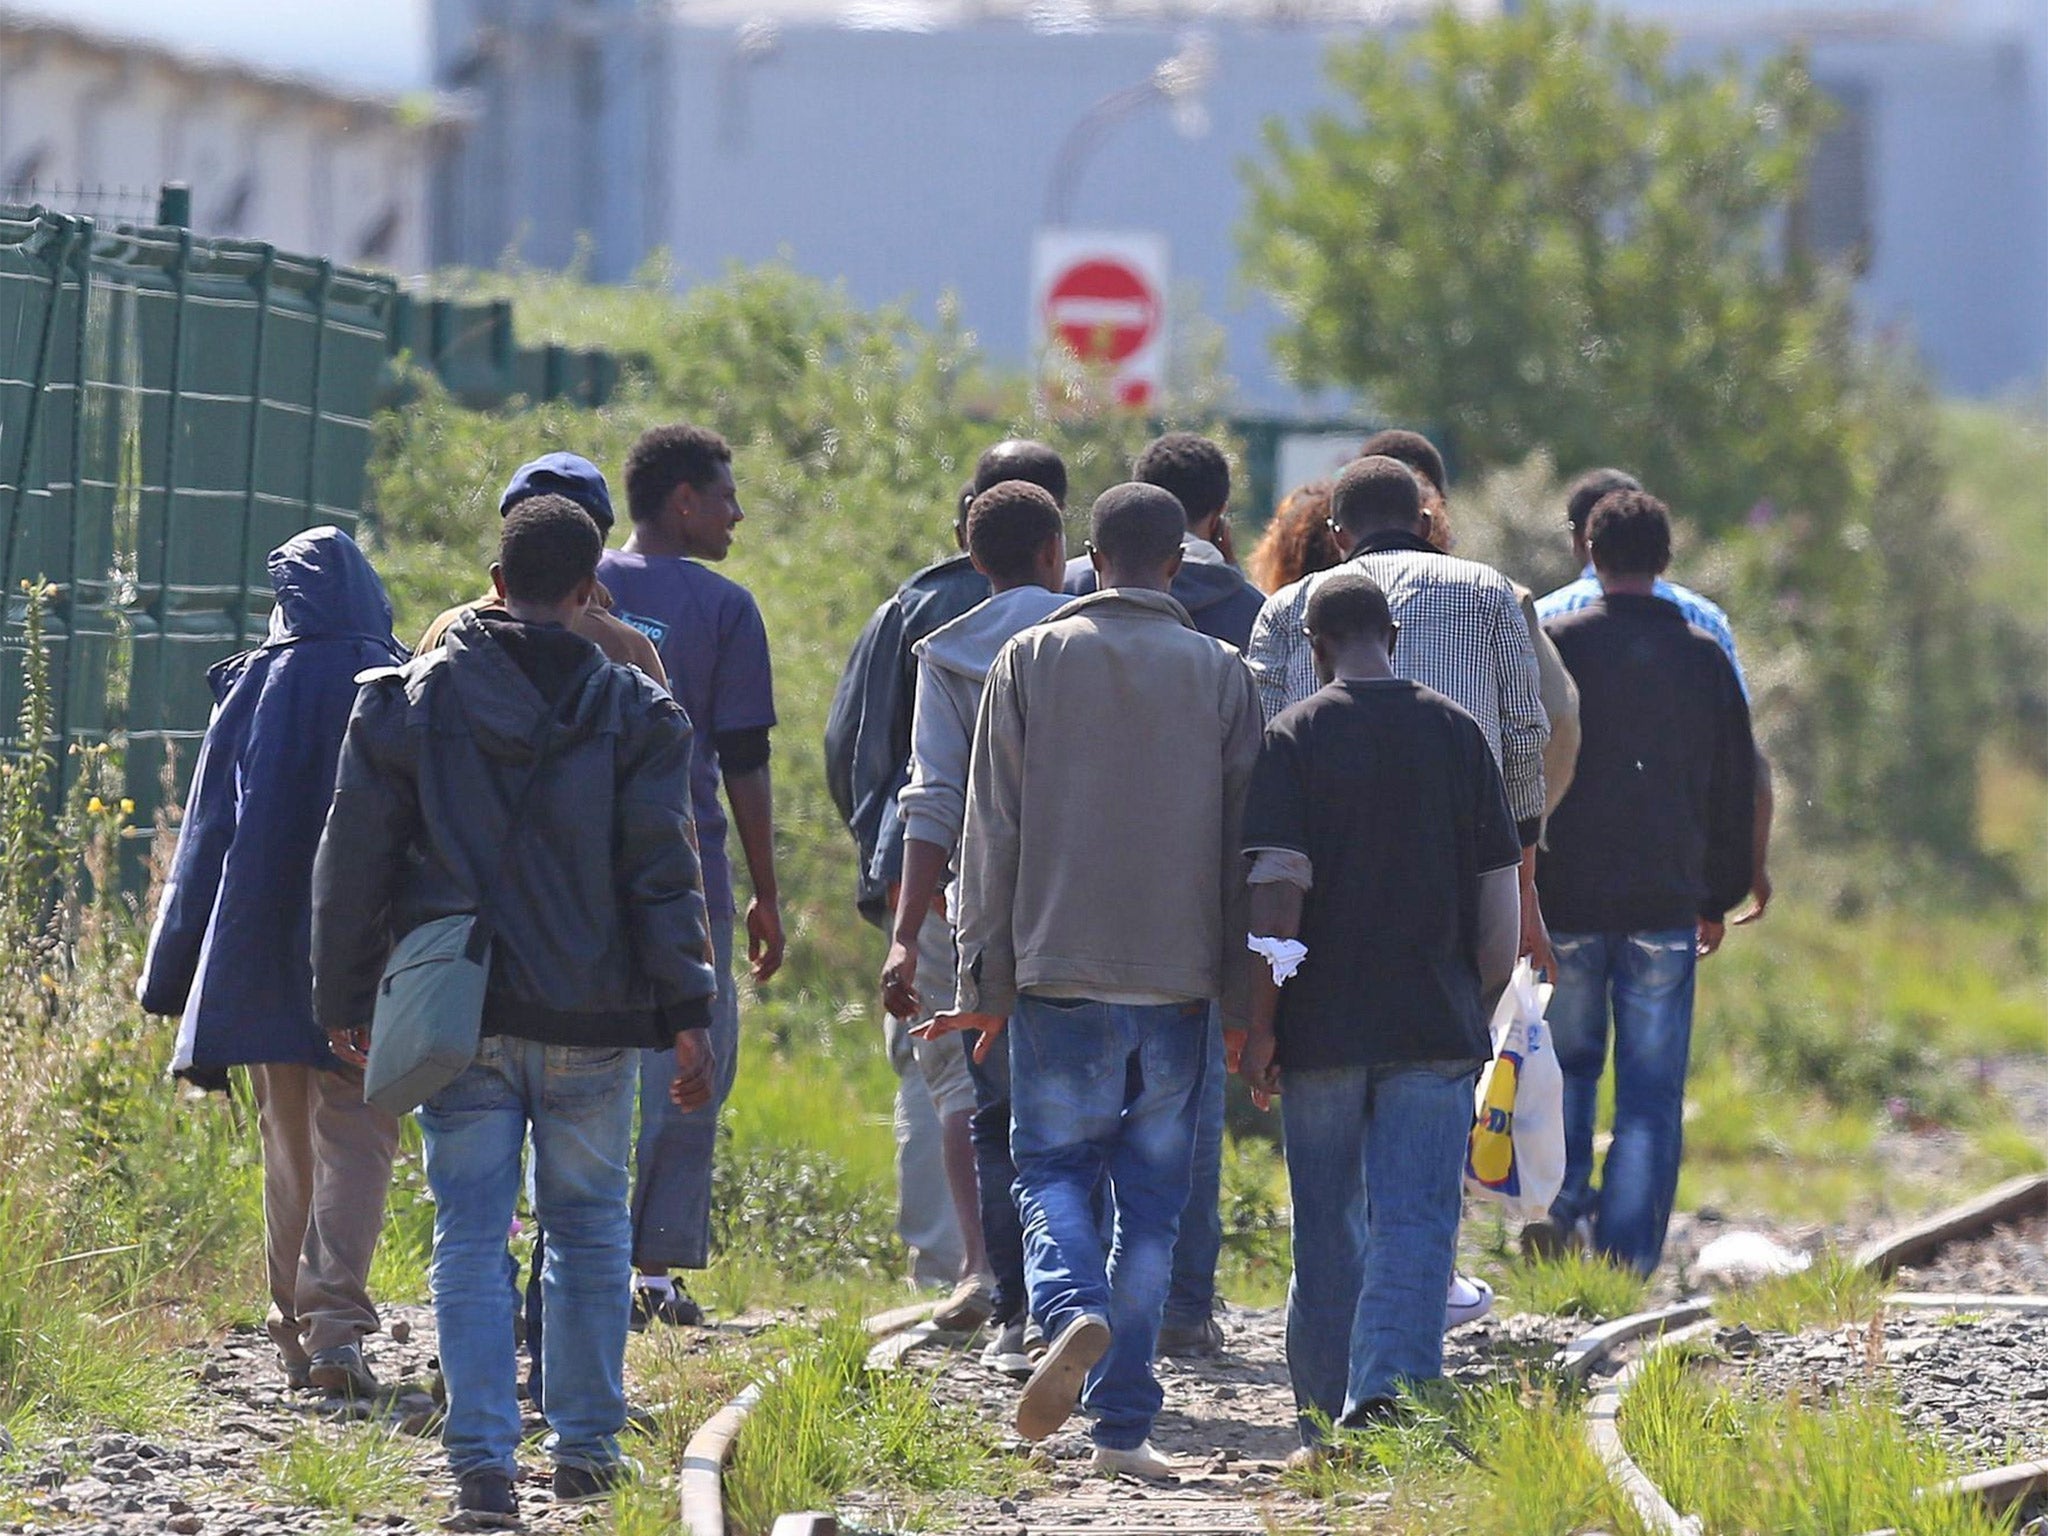 A group of migrants make their way through Calais, heading for Britain. France accepts over 20,000 asylum seekers per year, while Britain accepts just over 14,000